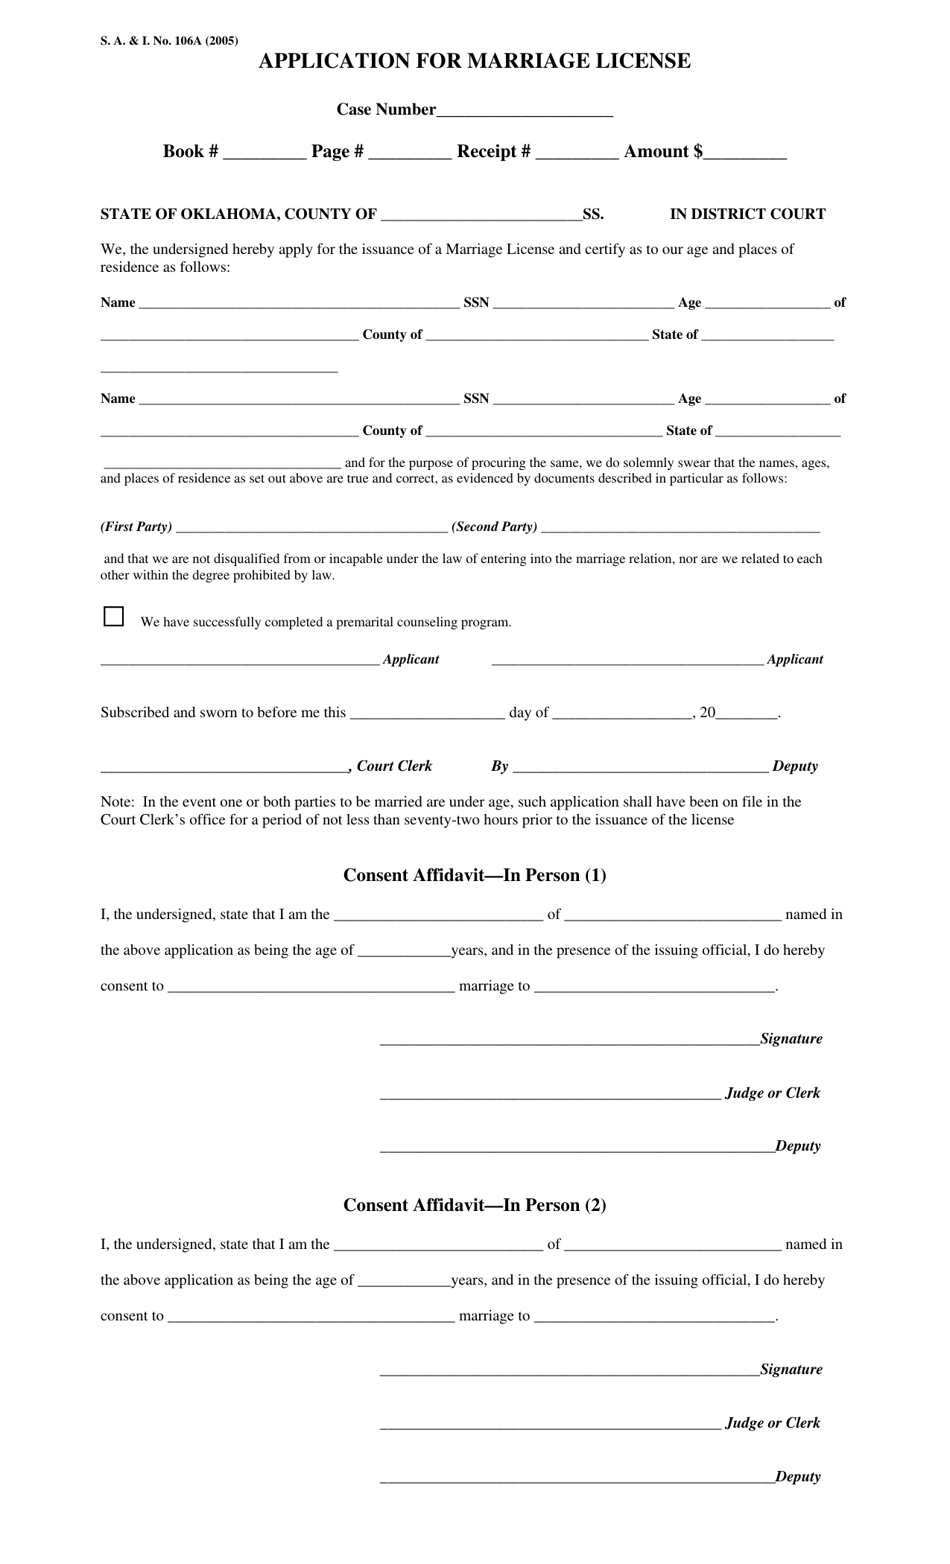 Form S.A. I.106A Application for Marriage License - Oklahoma, Page 1